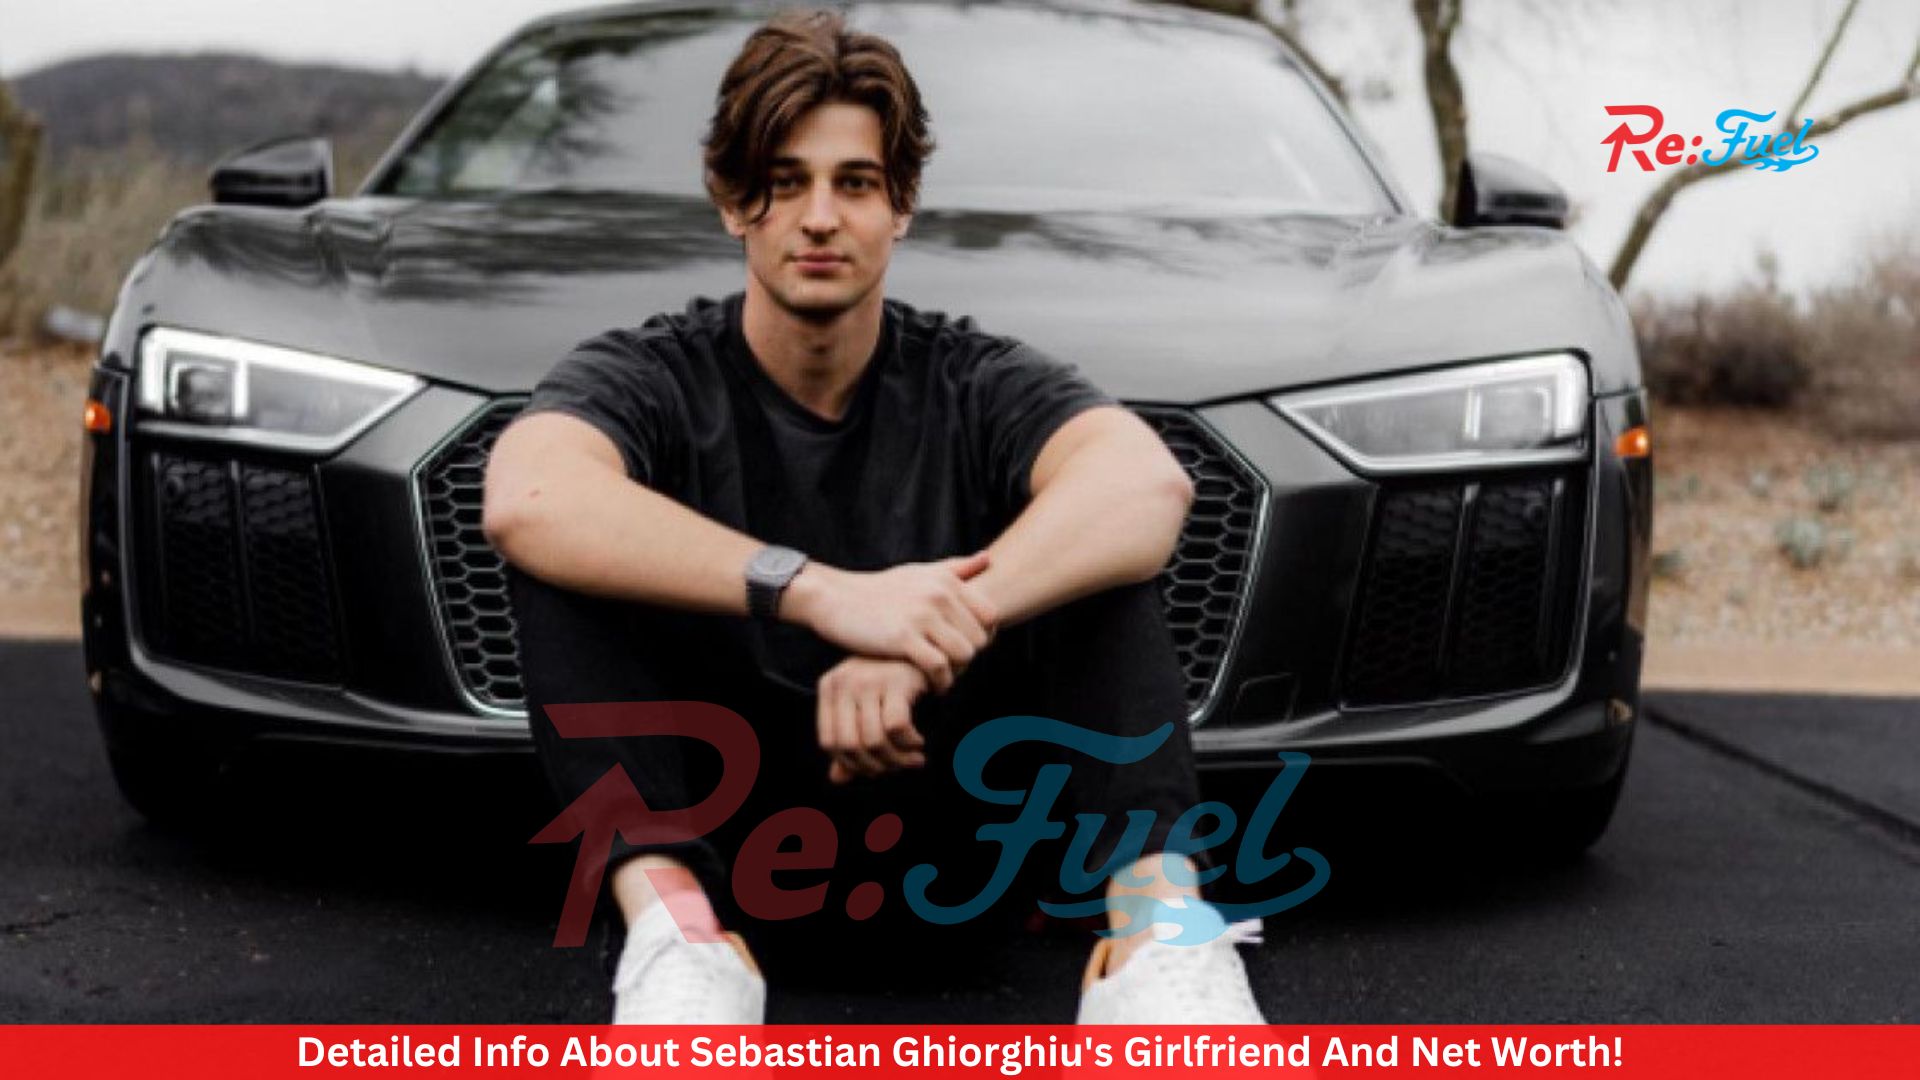 Detailed Info About Sebastian Ghiorghiu's Girlfriend And Net Worth!